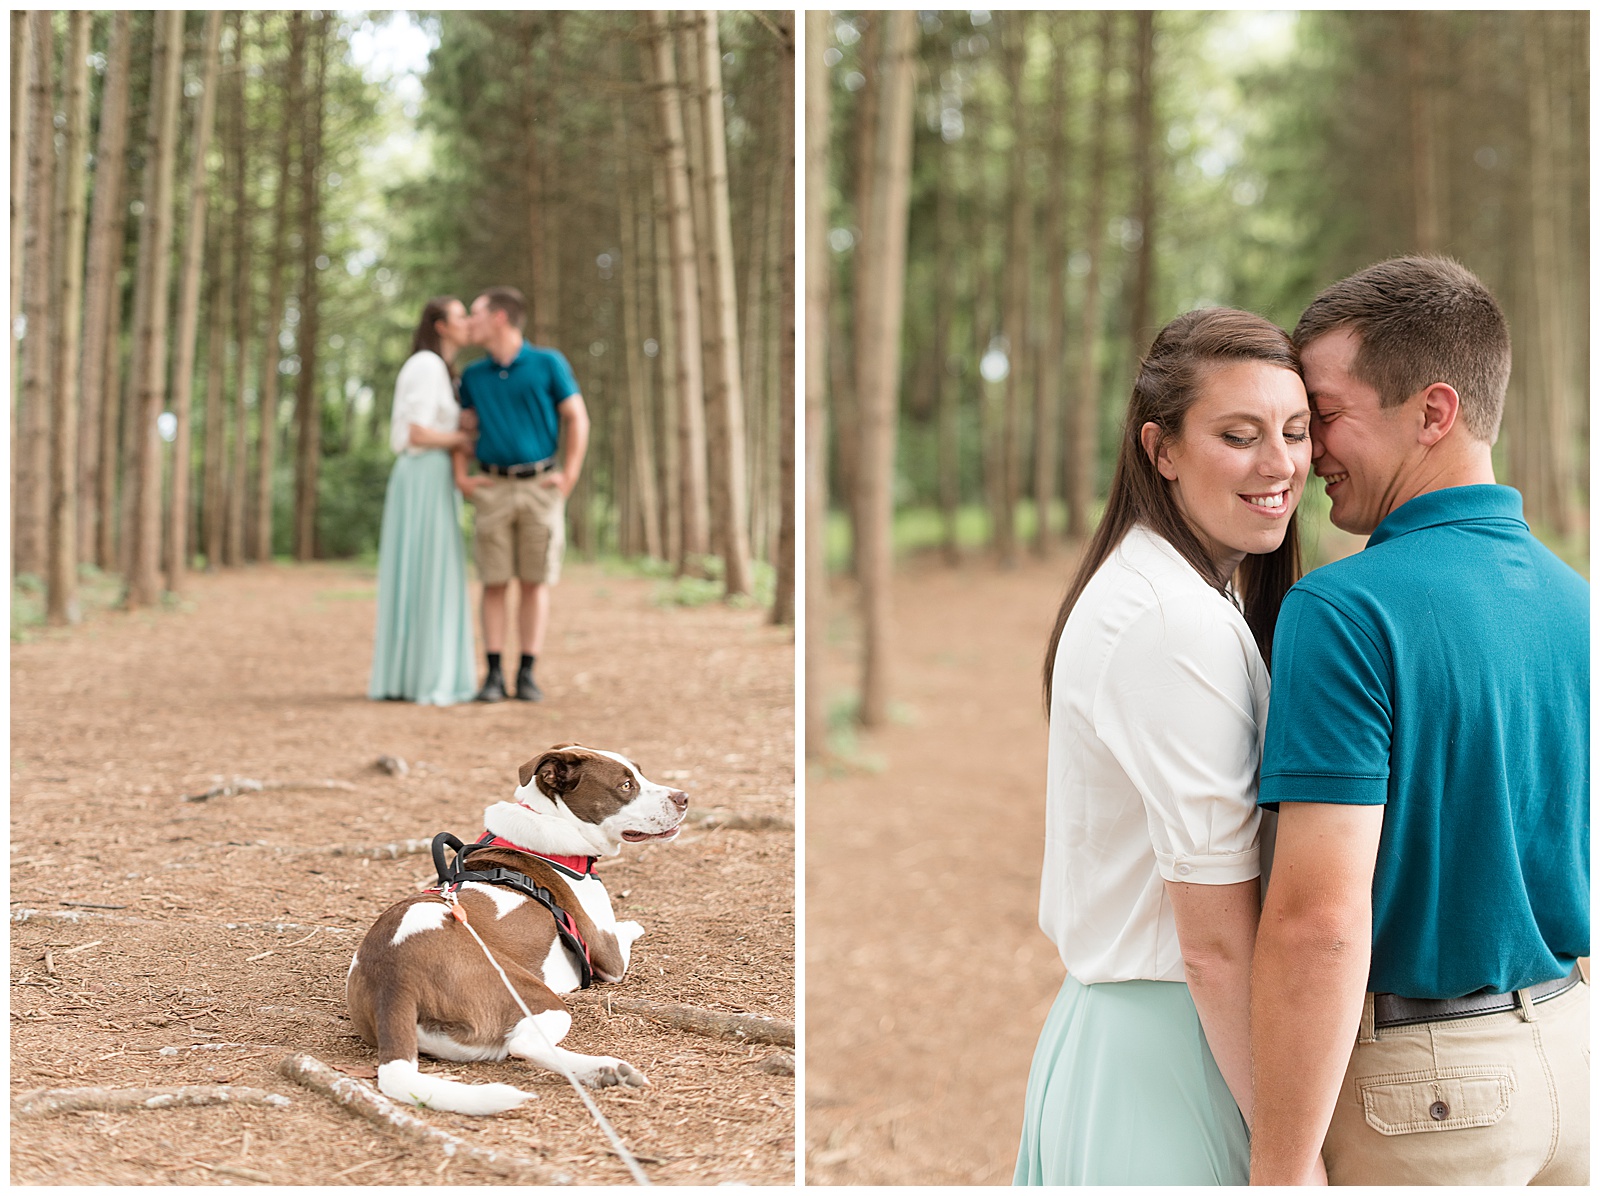 the couple is in the background with the rows of evergreen trees behind them standing on the path with their dog closer to the camera laying on the ground looking off in the distance and the couple is kissing with the girl on the left and the guy on the right side at Overlook Park in Lancaster, PA, close up photo of the couple standing close with the girl on the left standing towards the guy with her eyes looking down and smiling as the guy stands on the right with this back to the camera holding her hand and resting his face against the left side of her face and they are both smiling while standing on the path with the rows of evergreen trees surrounding them at Overlook Park in Lancaster, PA